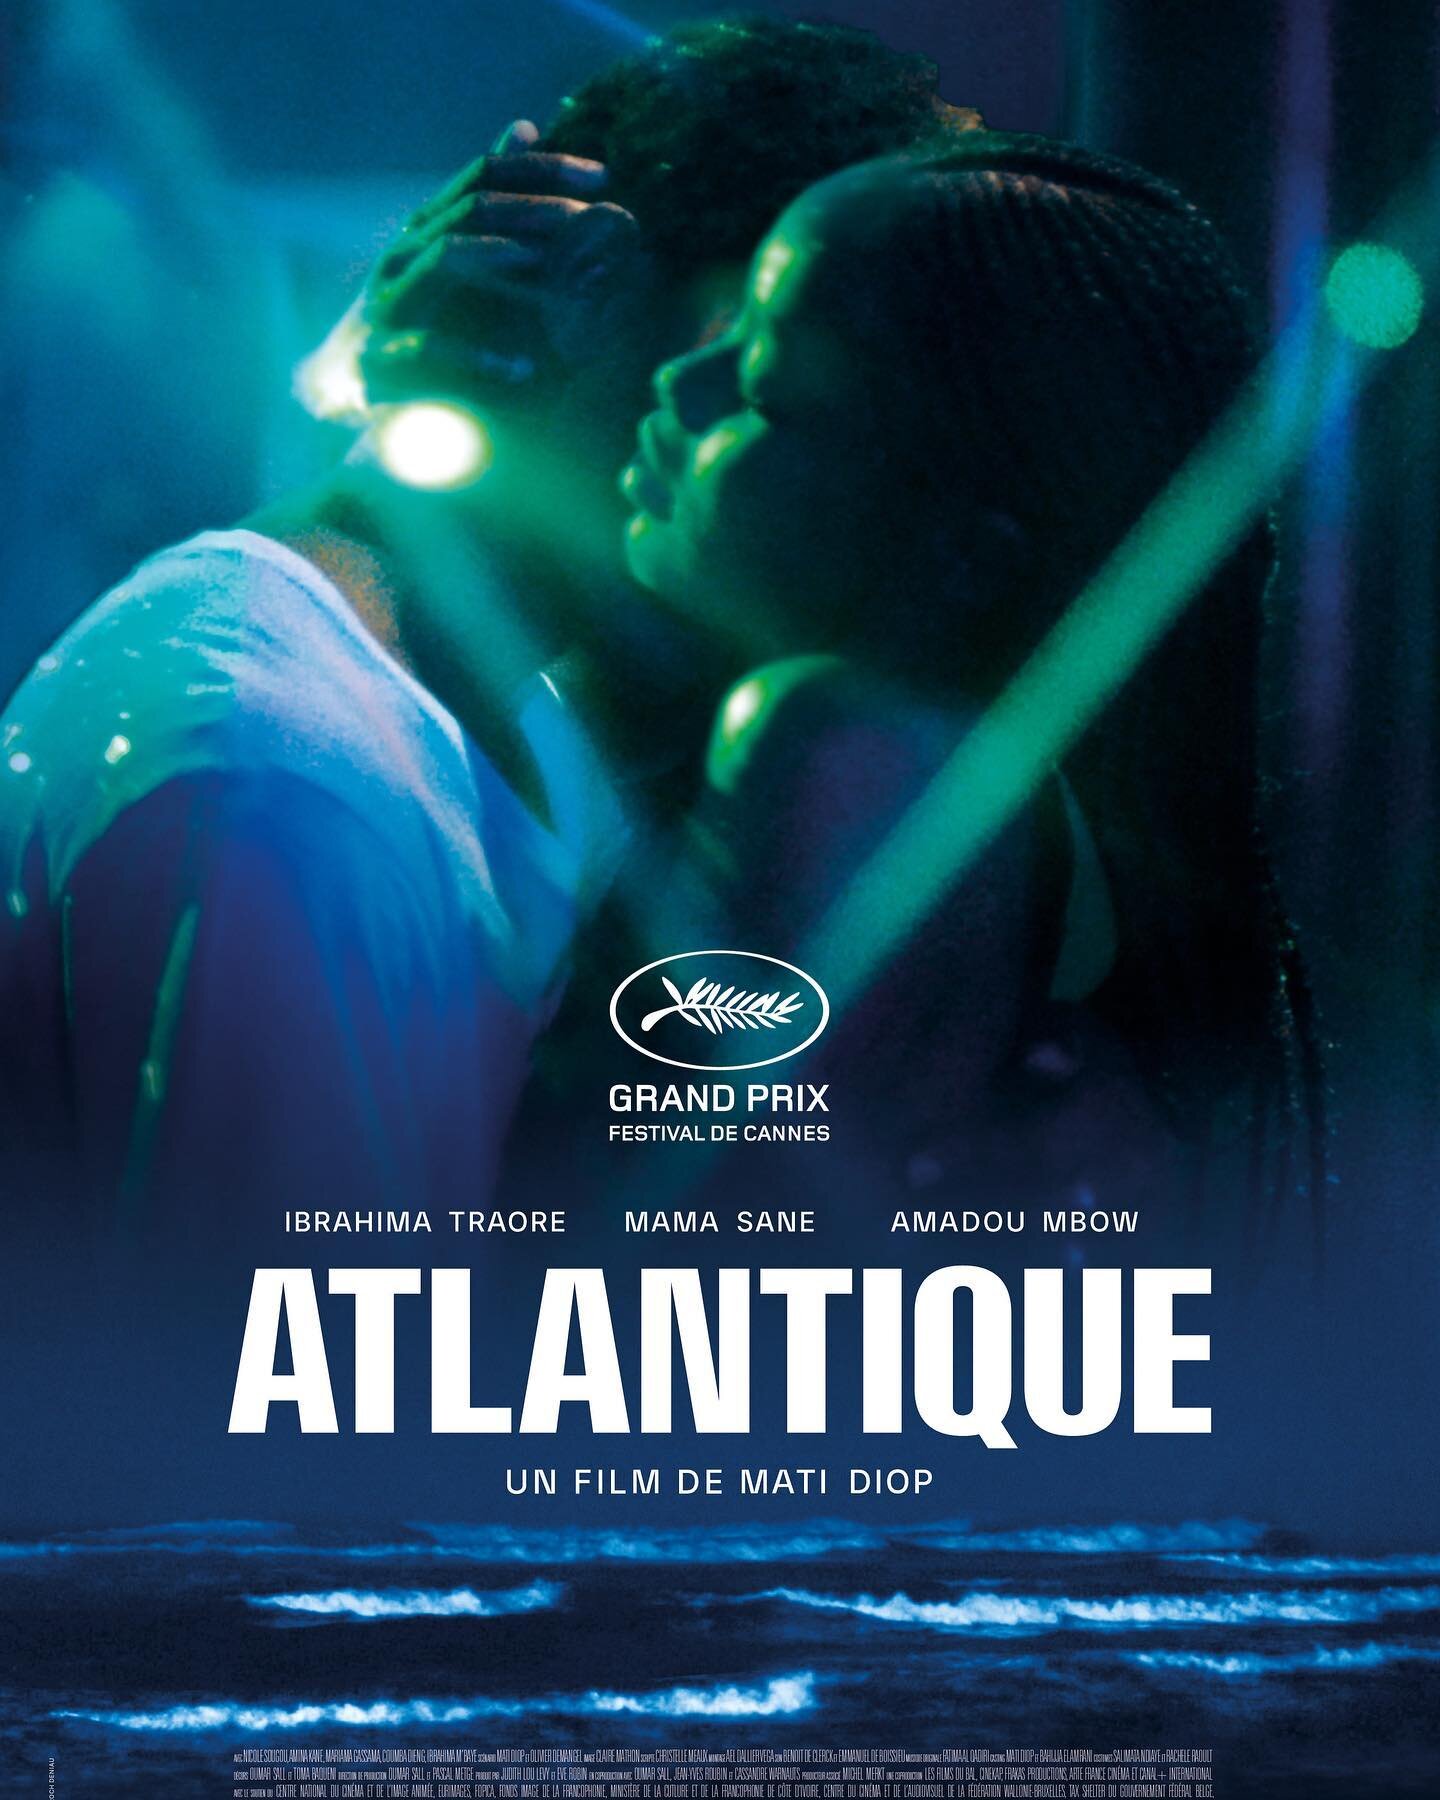 in honor of Senegalese Independence Day, we&rsquo;re highlighting some of the 43 films from the west african nation in our archive. 

Atlantics (2019) dir. Mati Diop
Black Girl (1966) dir. Ousmane Semb&egrave;ne
Sadio Man&eacute;: Made in Senegal (20